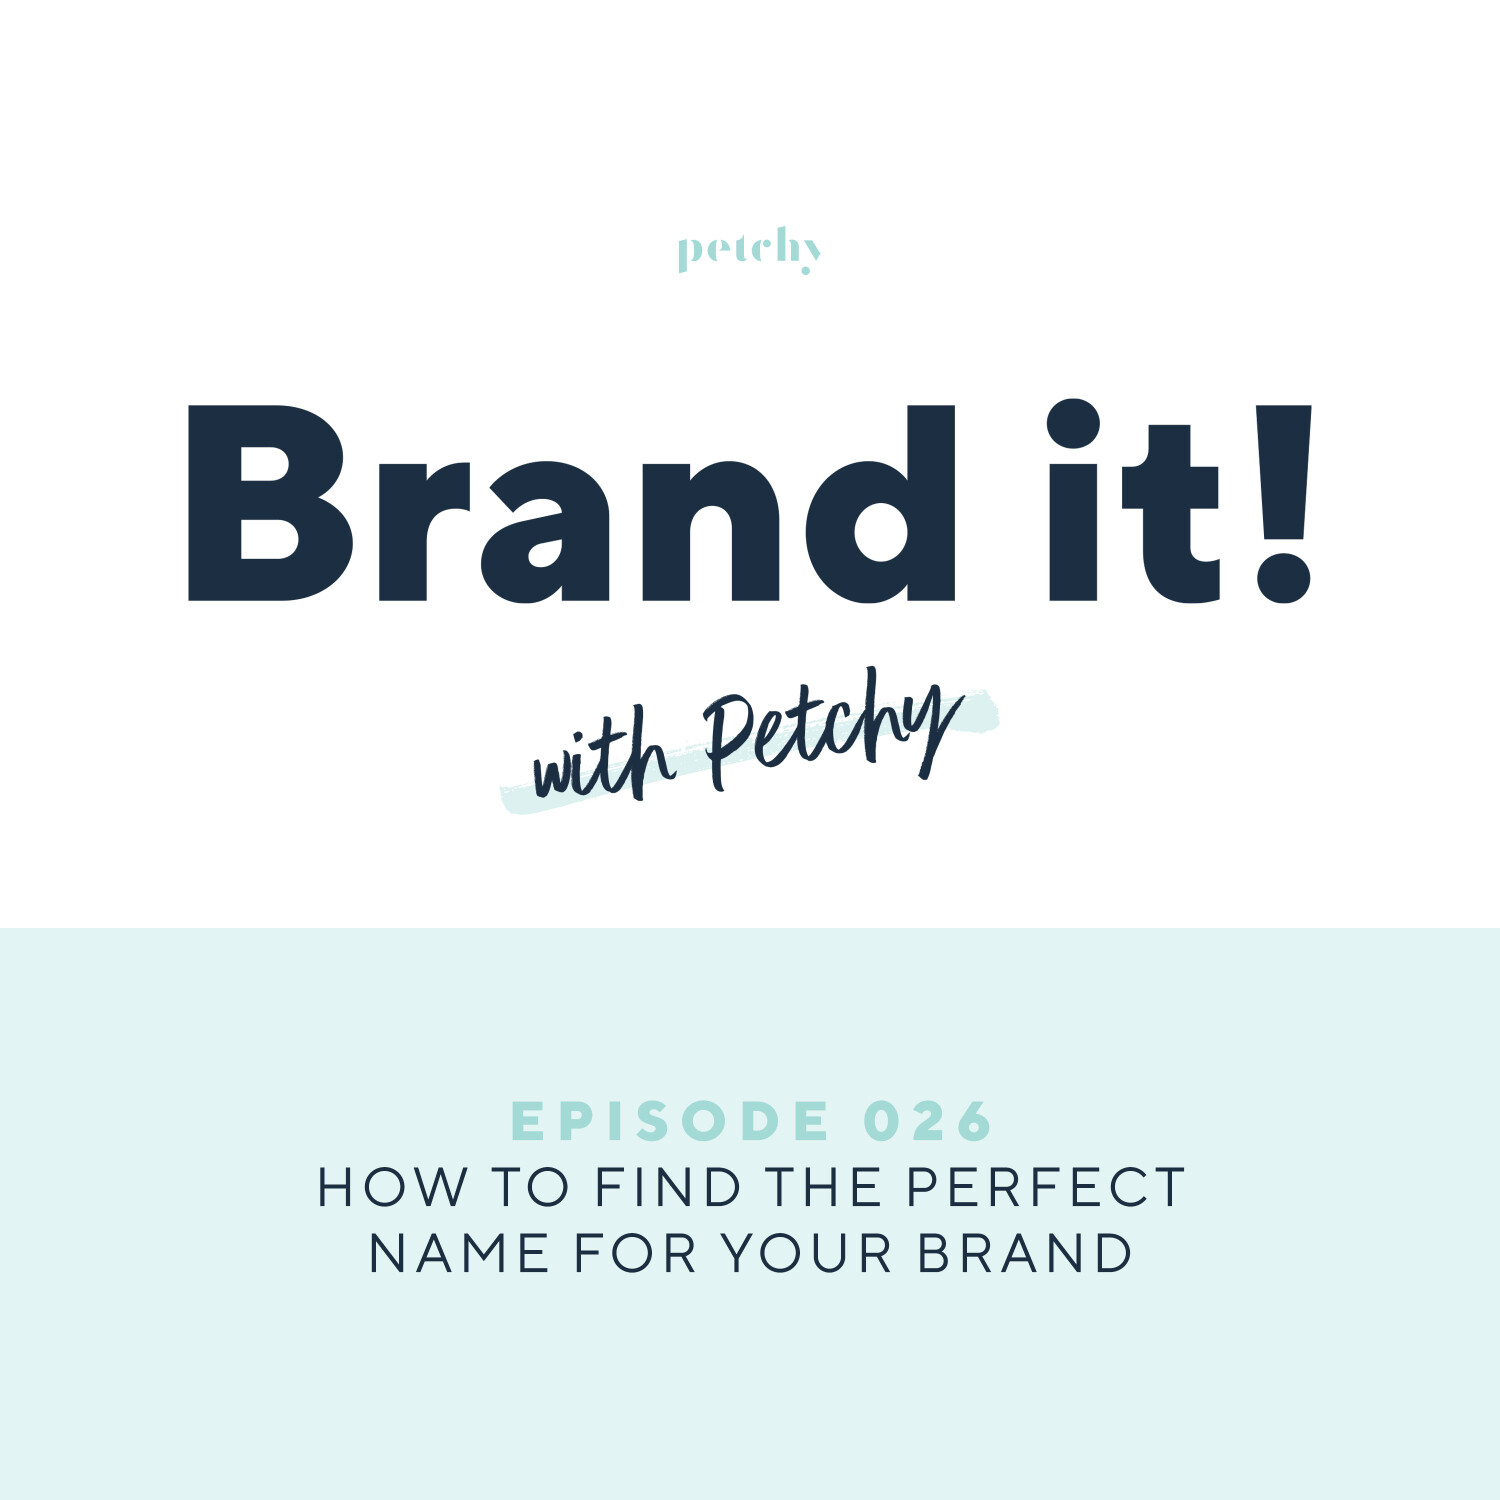 How to find the perfect name for your brand